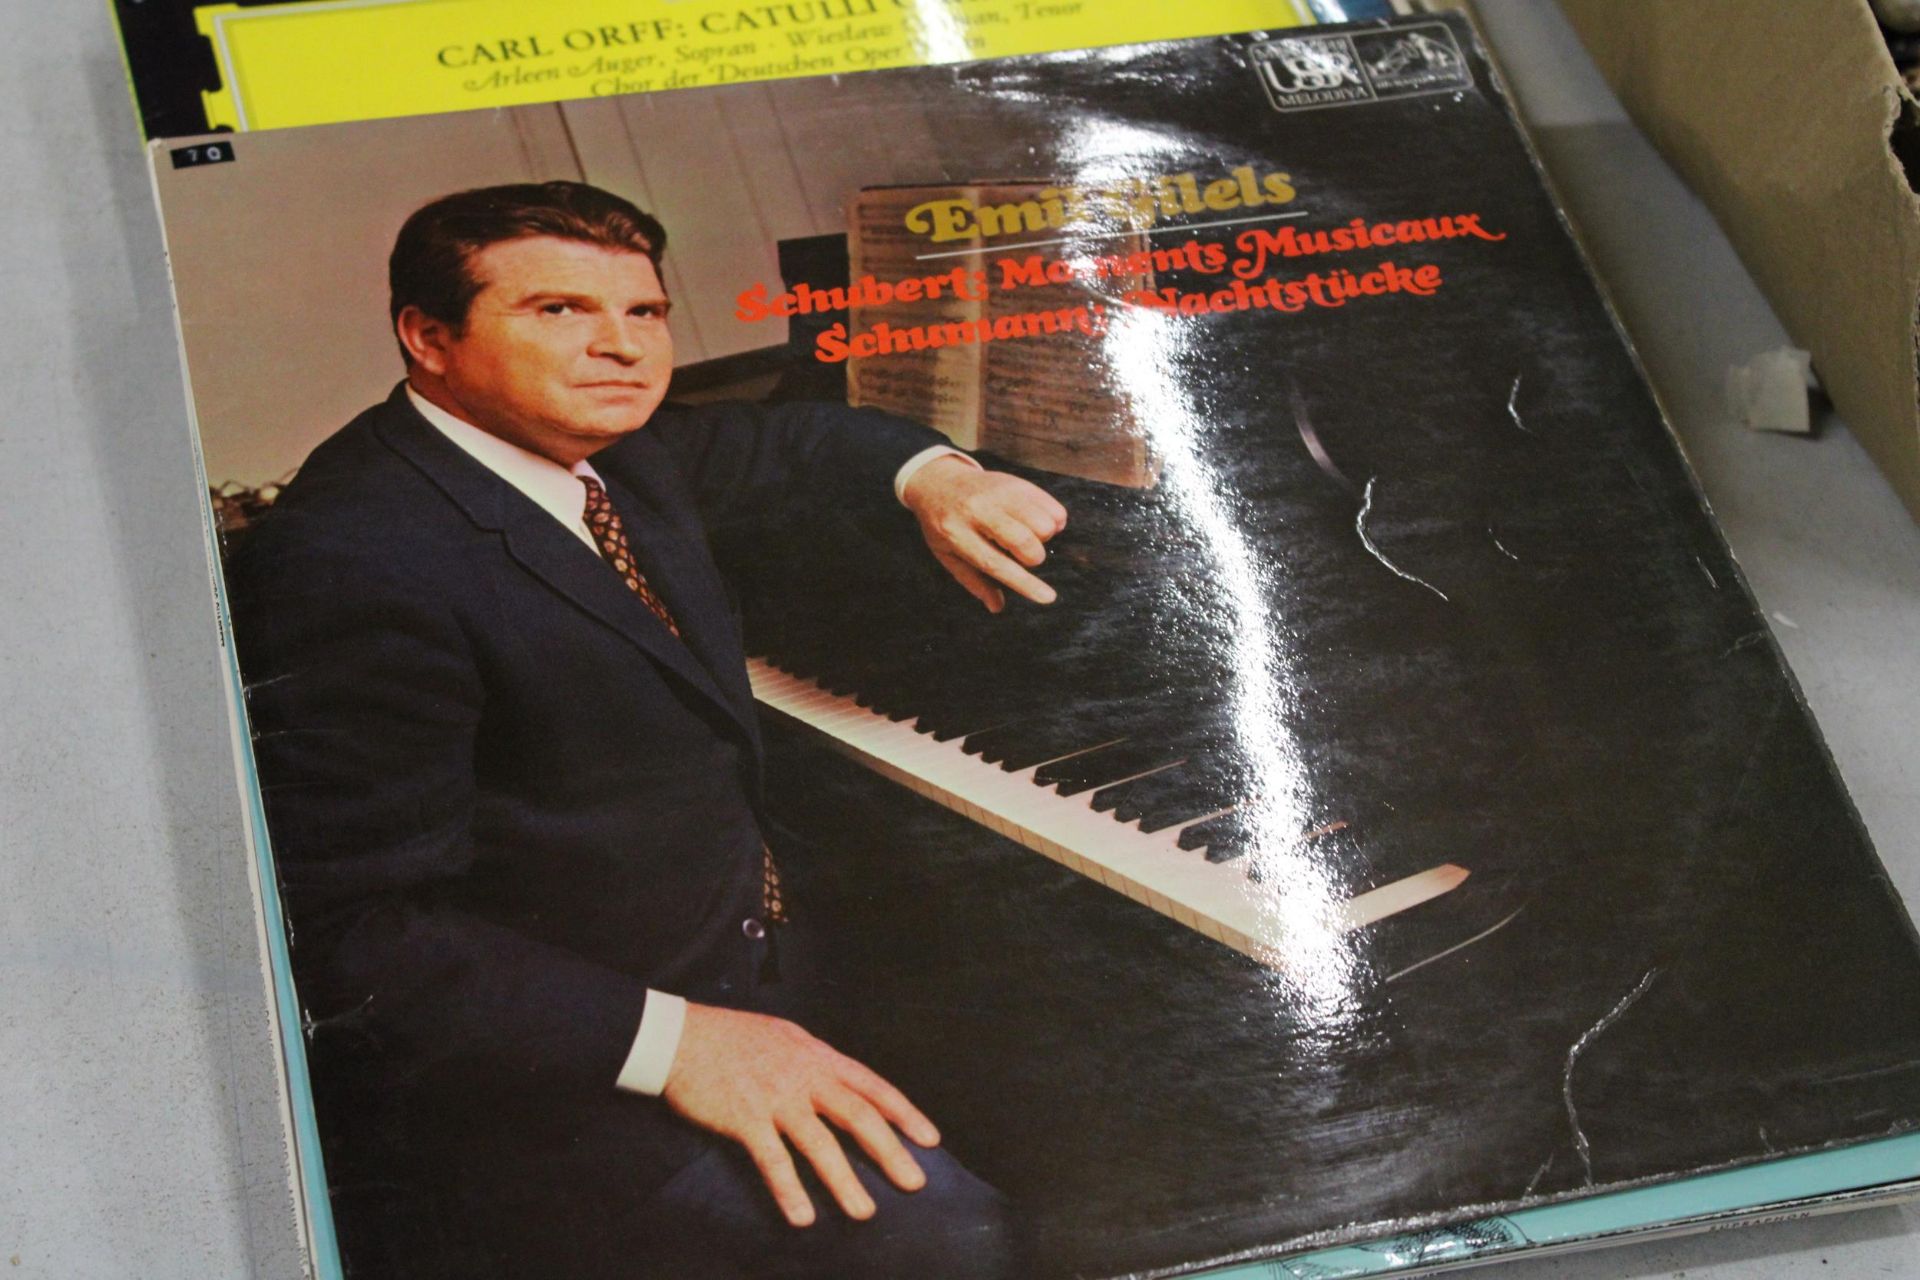 A COLLECTION OF VINTAGE CLASSICAL VINYL LP'S TO INCLUDE SCHUMANN, BEETHOVEN, ETC - Image 4 of 5